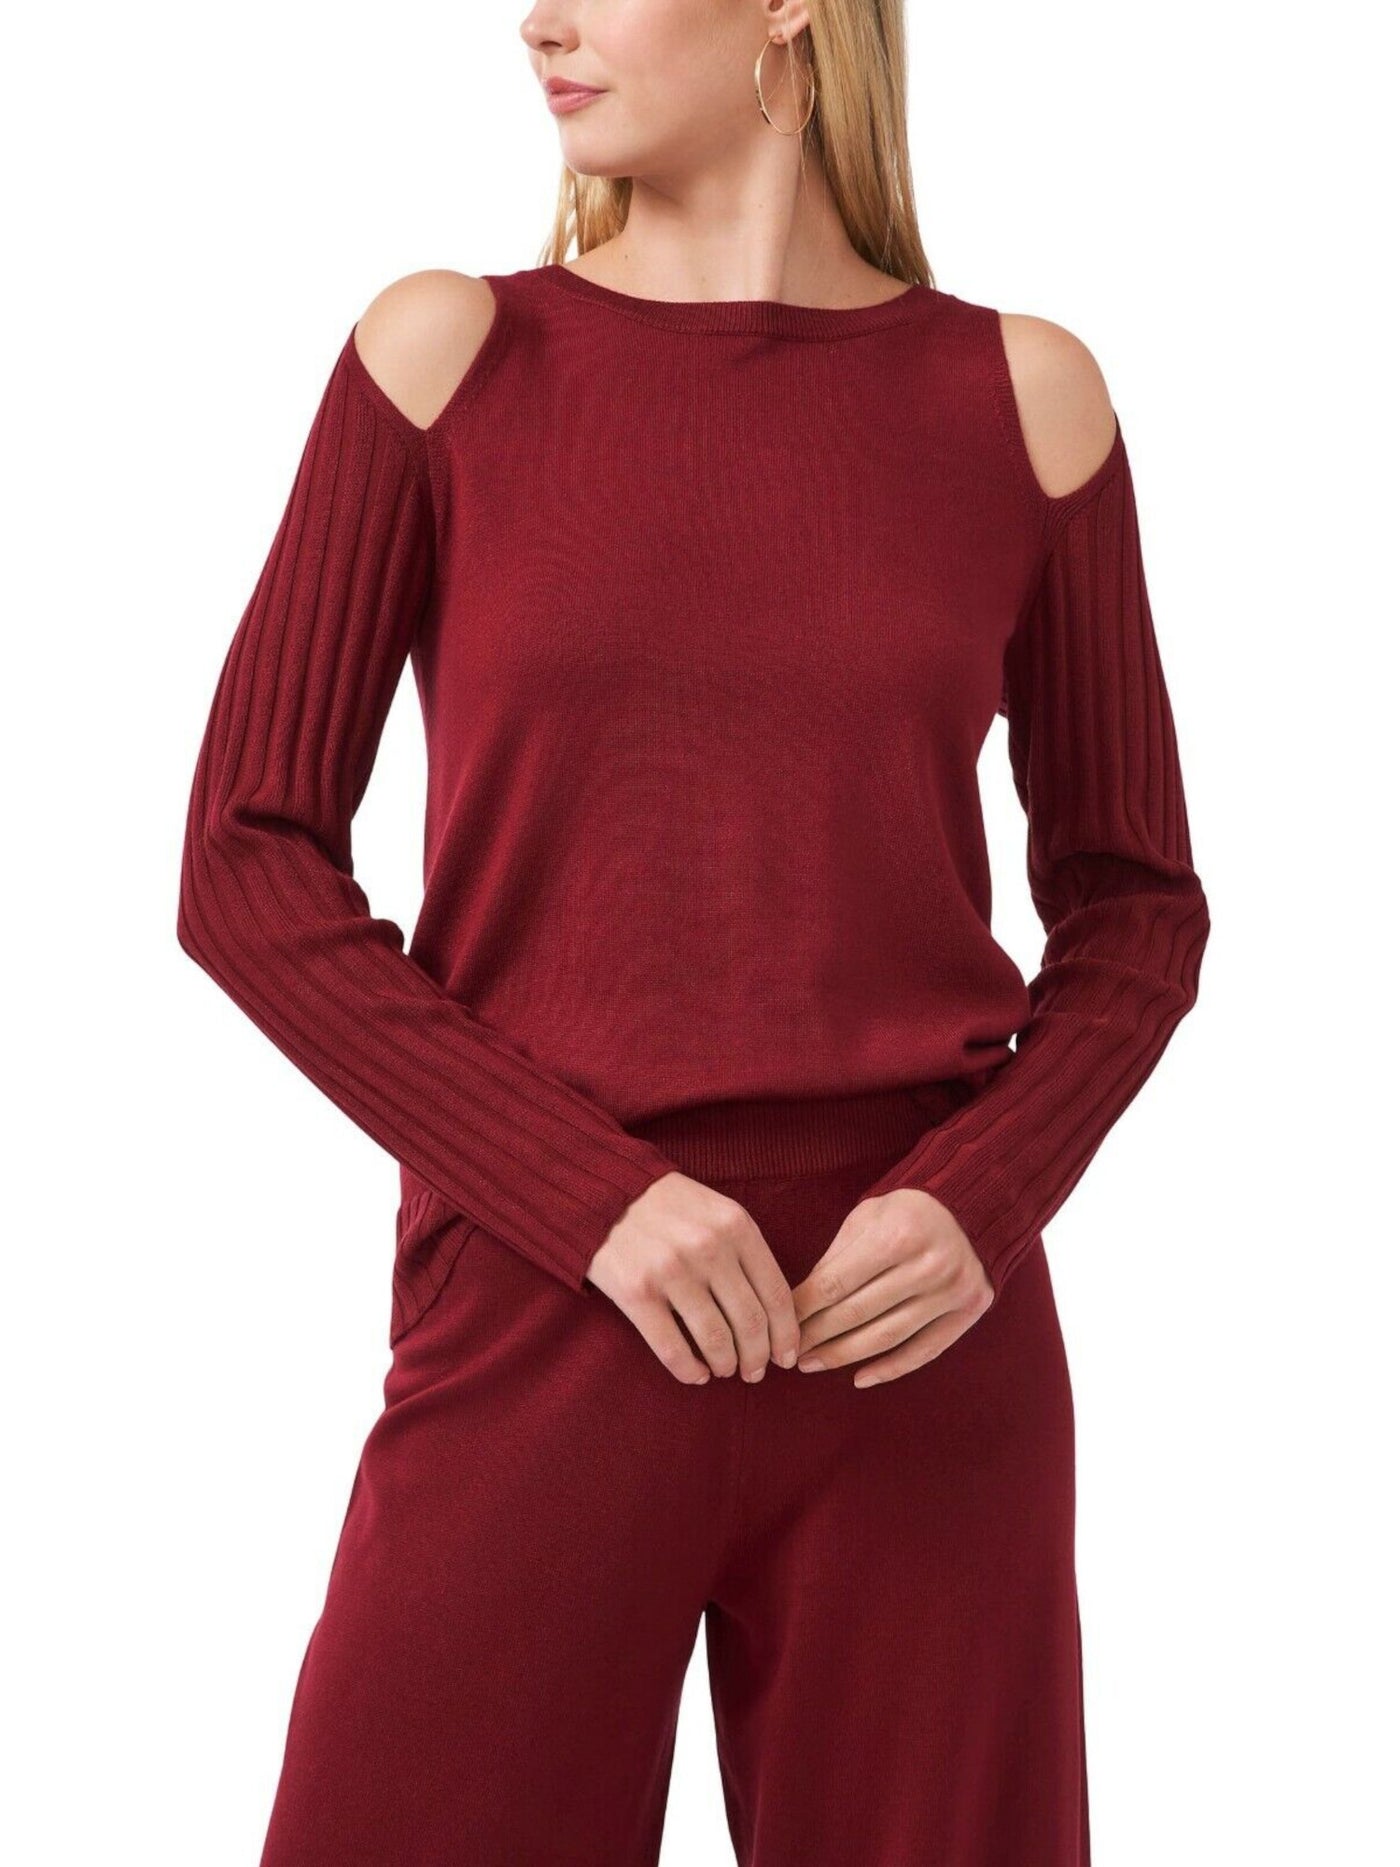 VINCE CAMUTO Womens Maroon Stretch Ribbed Cold Shoulder Mixed Textured Long Sleeve Crew Neck Top M